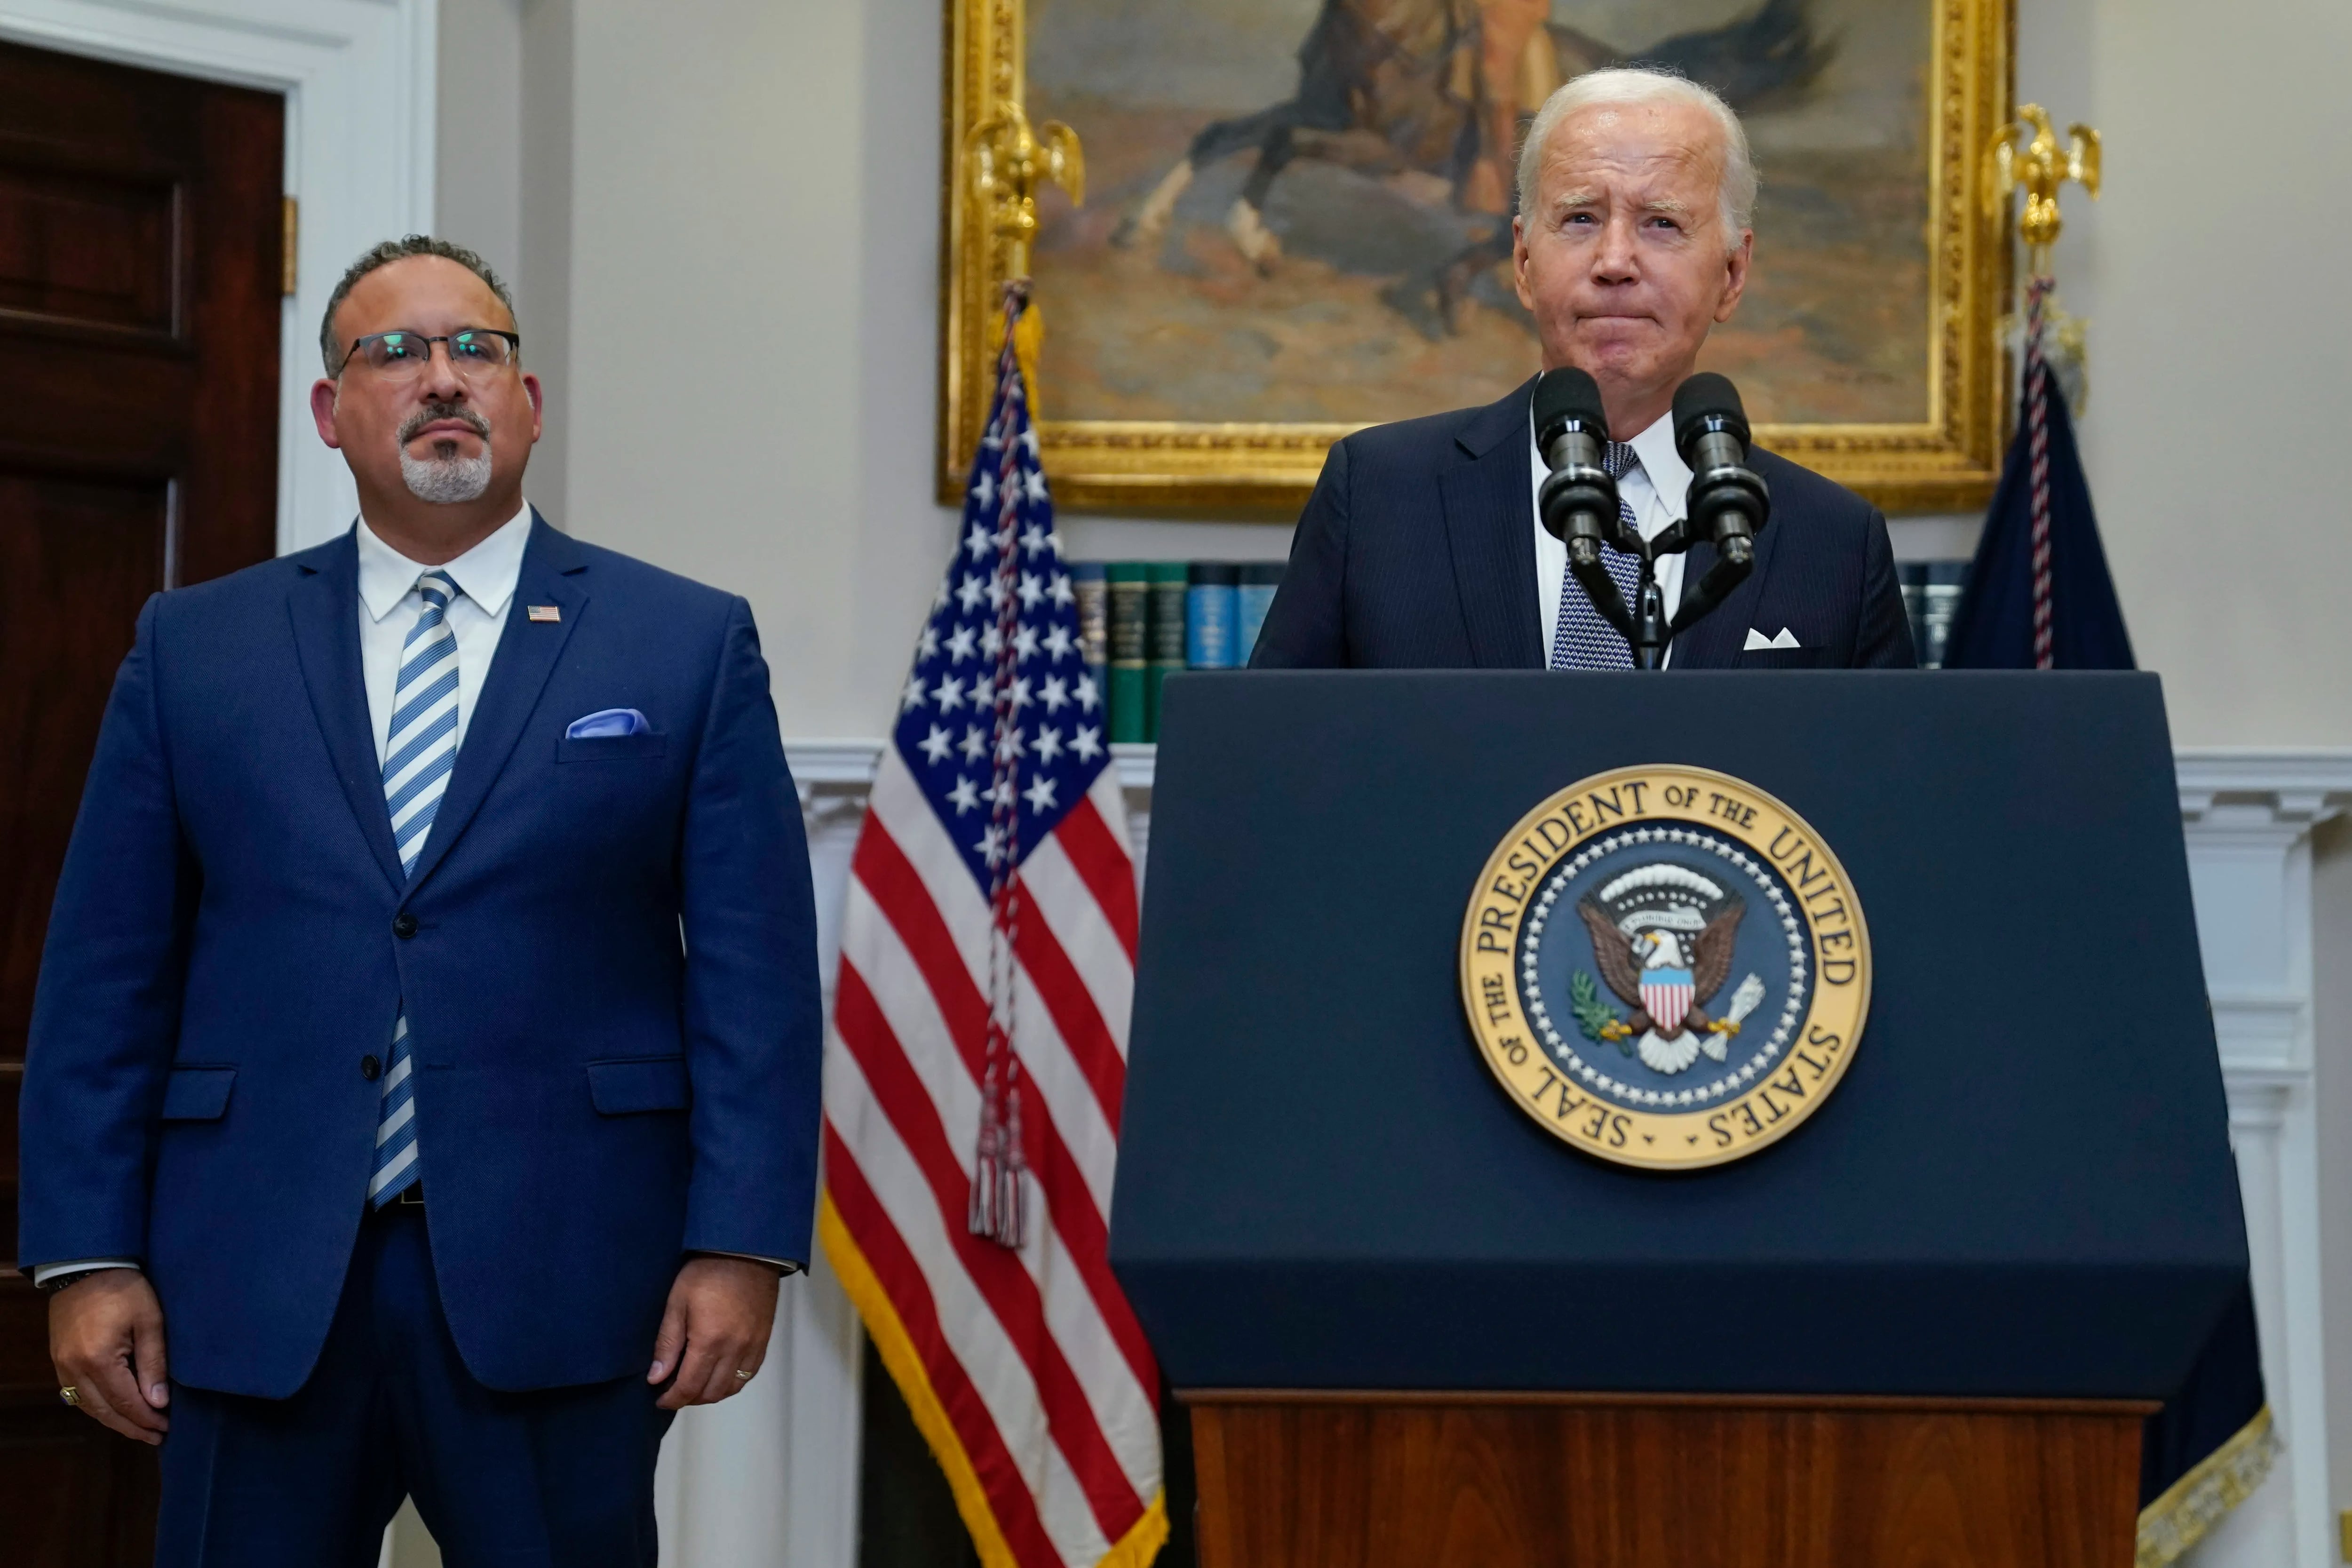 President Joe Biden speaking in the Roosevelt Room of the White House with Education Secretary Miguel Cardona standing next to him in June.